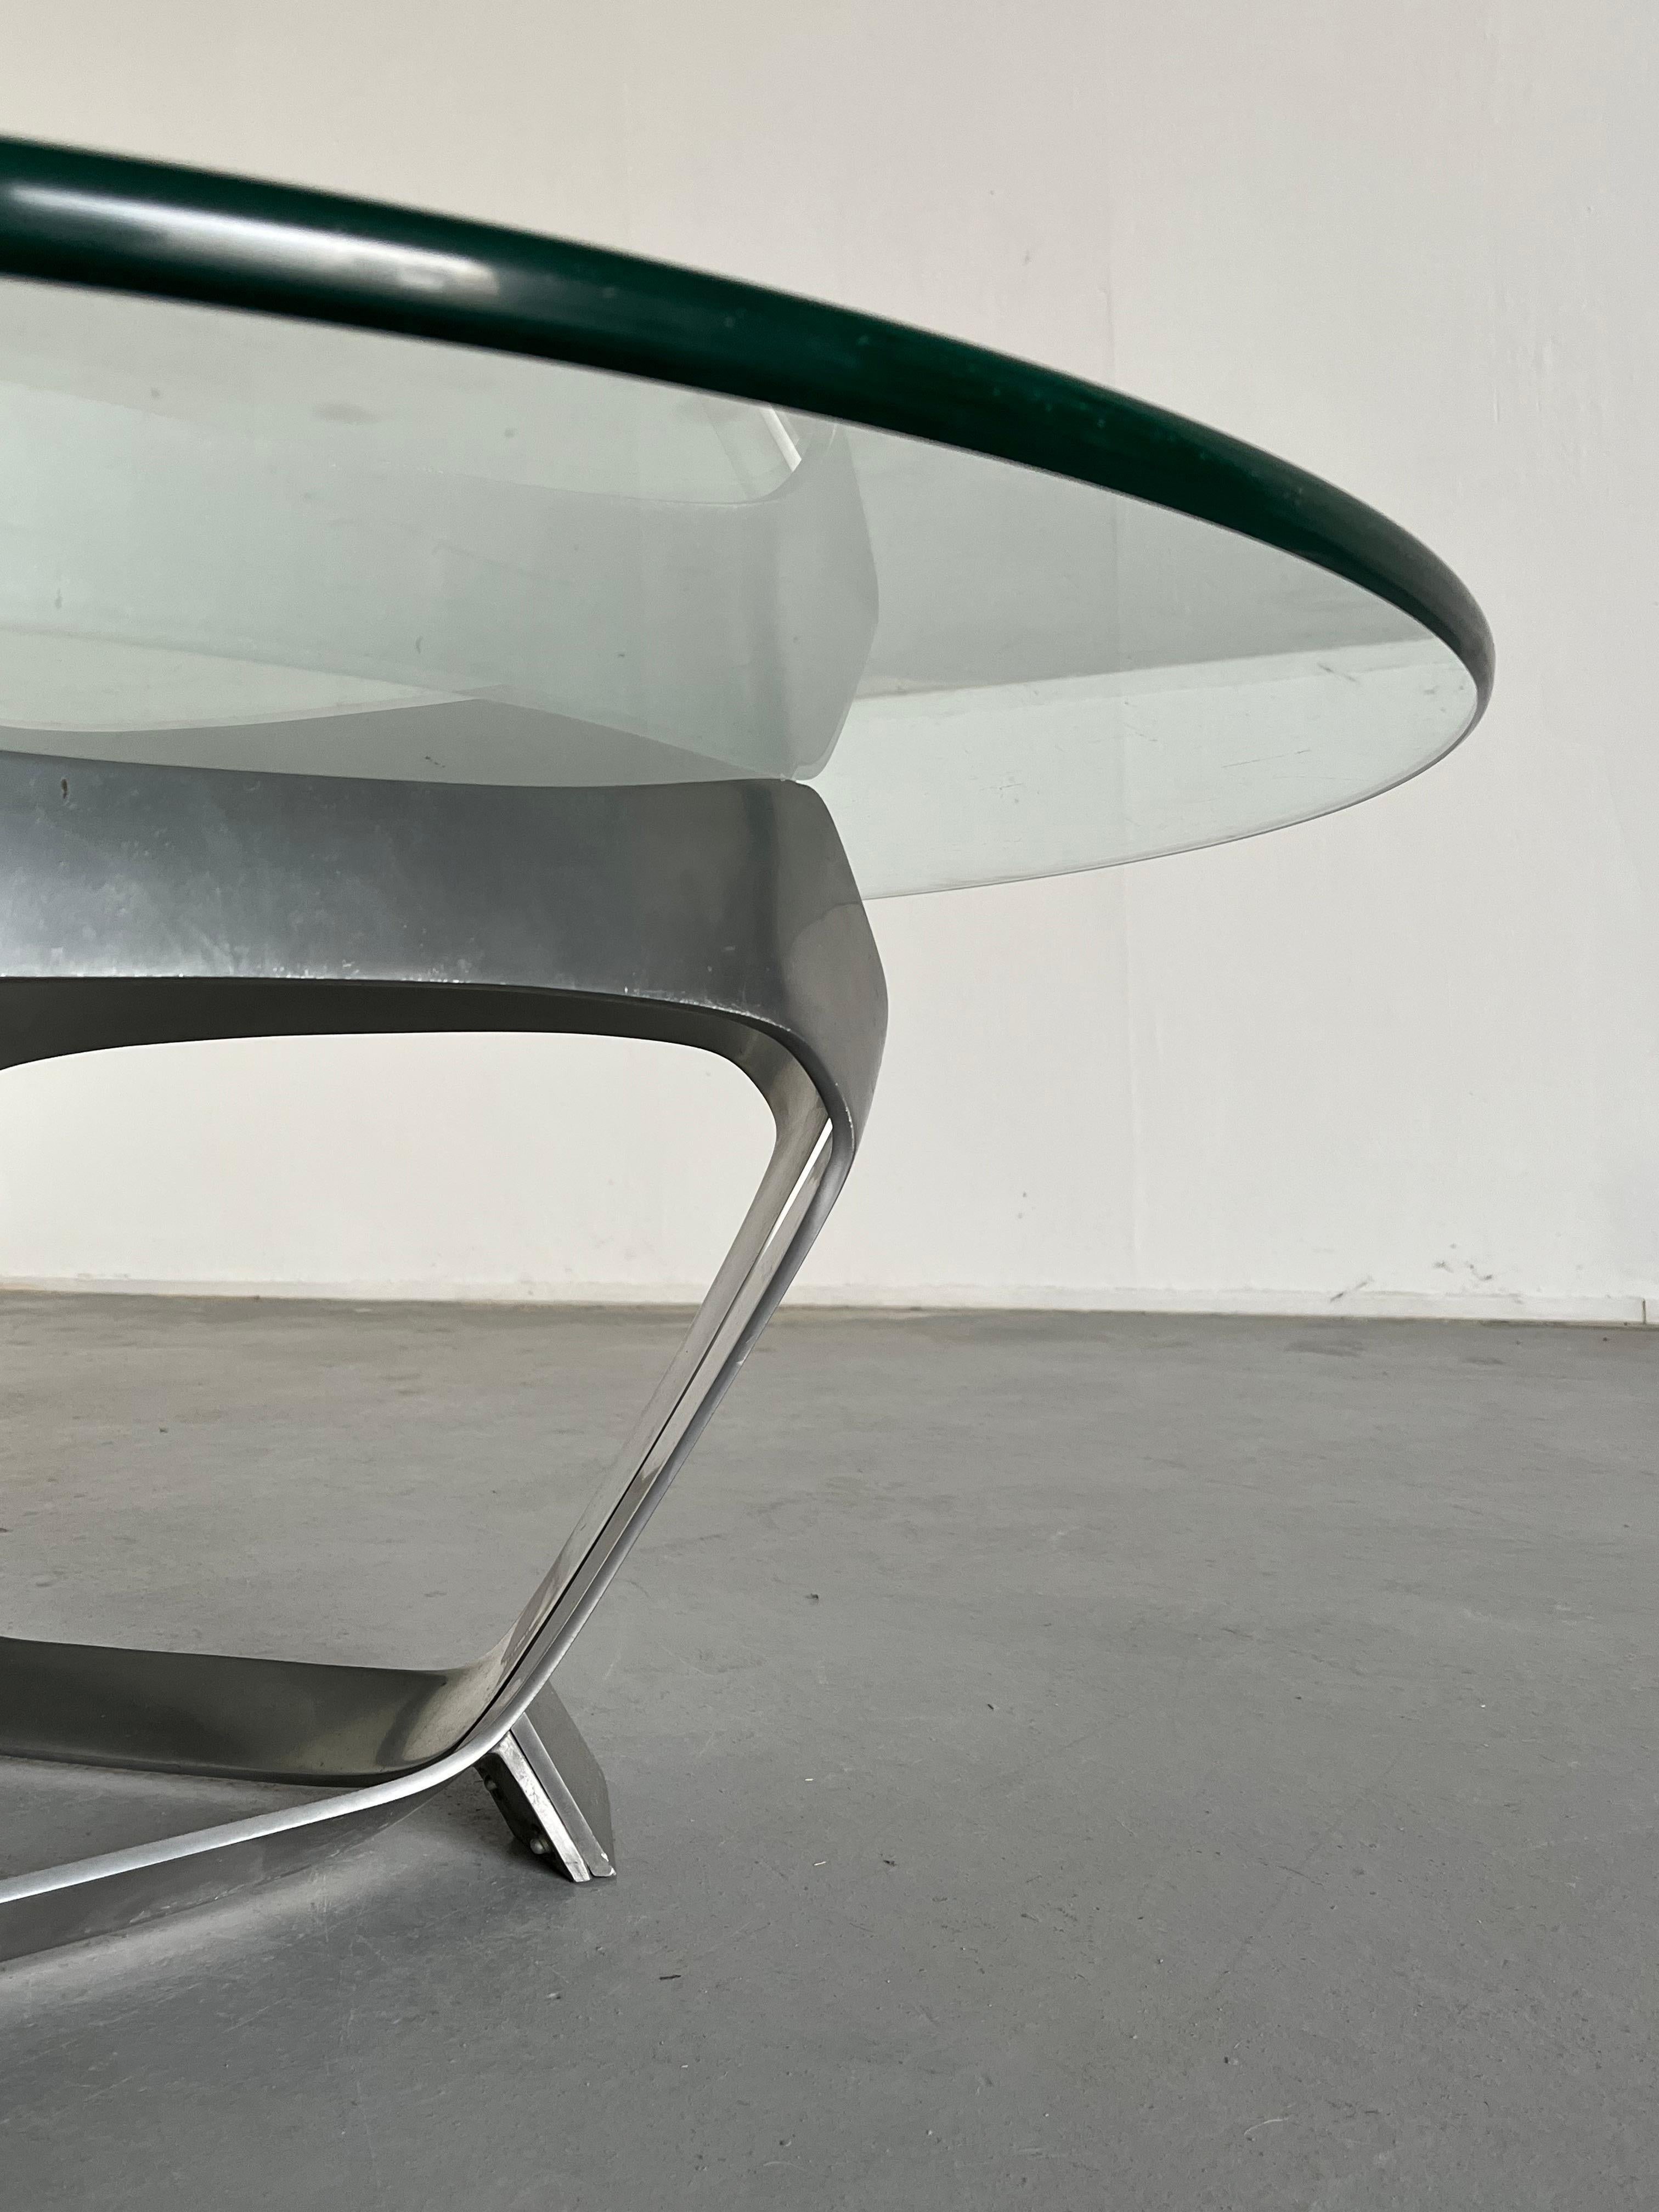 Metal Modernist Aluminium Glass Vintage Coffee Table by Knut Hesterberg, 1970s Germany For Sale